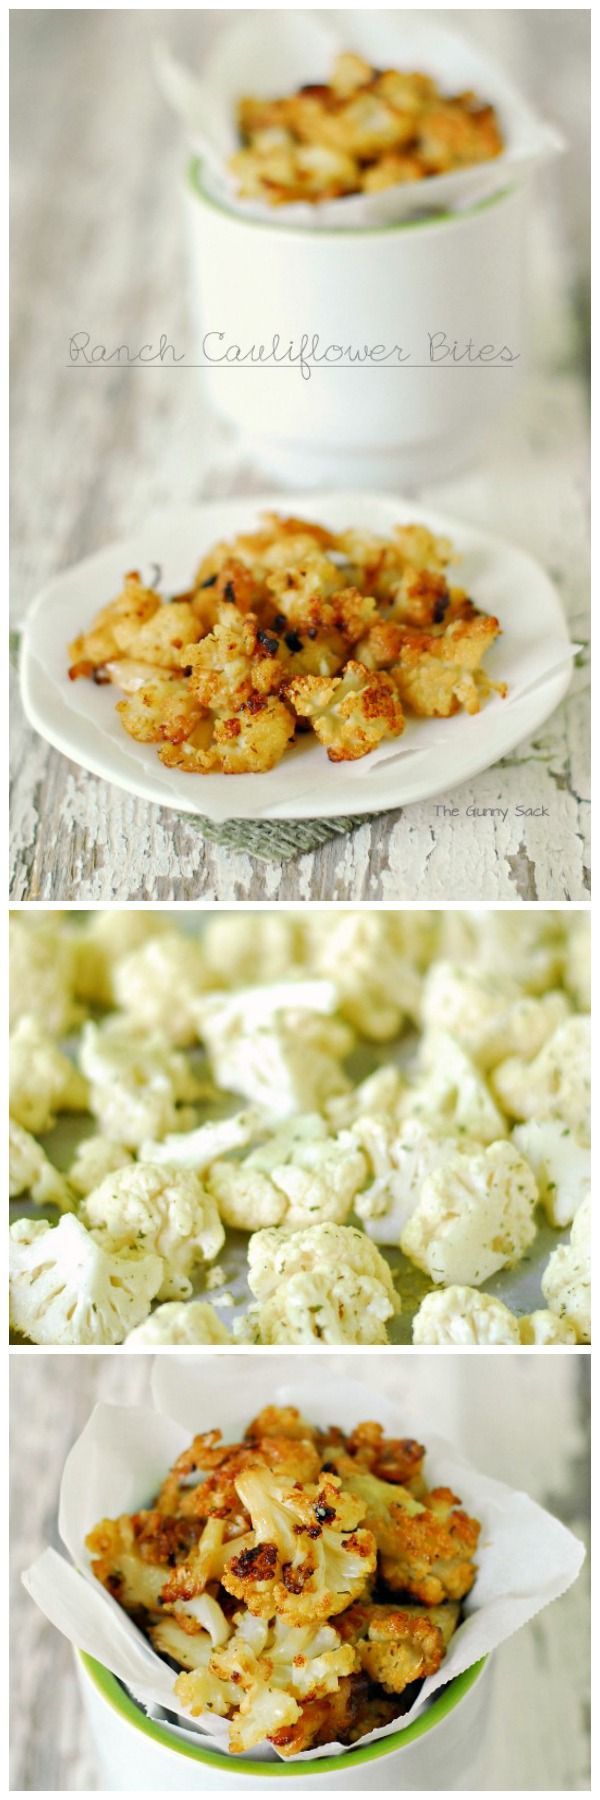 This sounds super duper yummy like eep omigosh I srsly love cauliflower when it’s cooked right~ .//w//.